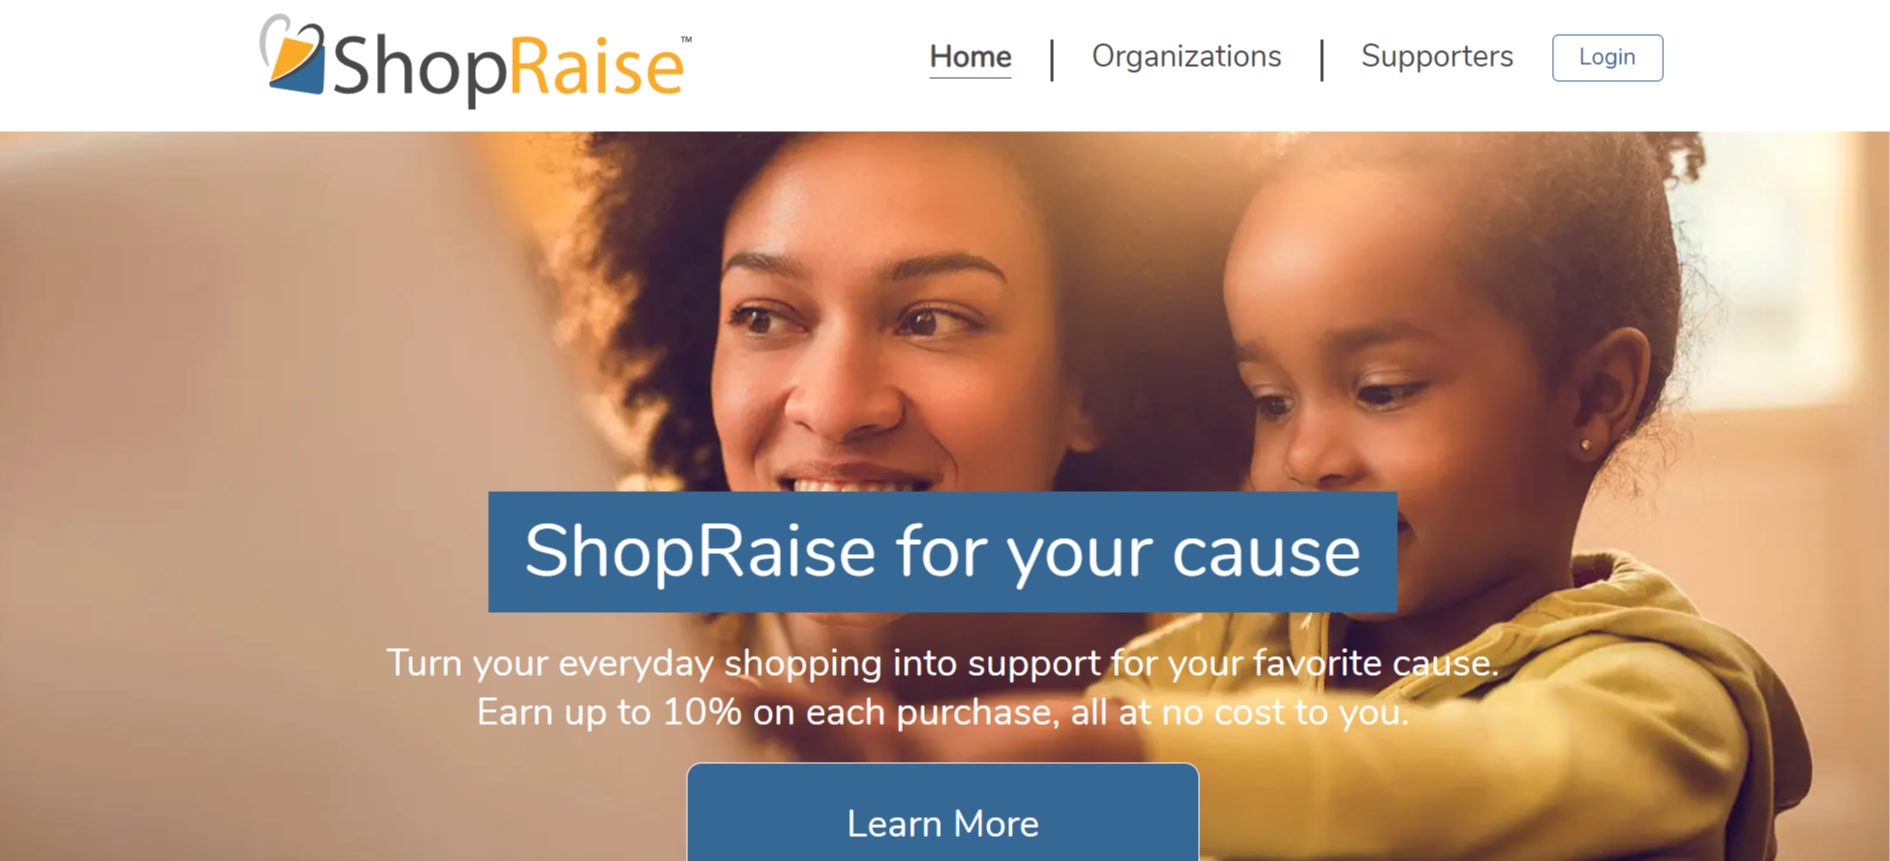 Find out how ShopRaises can help you fundraise for your school.